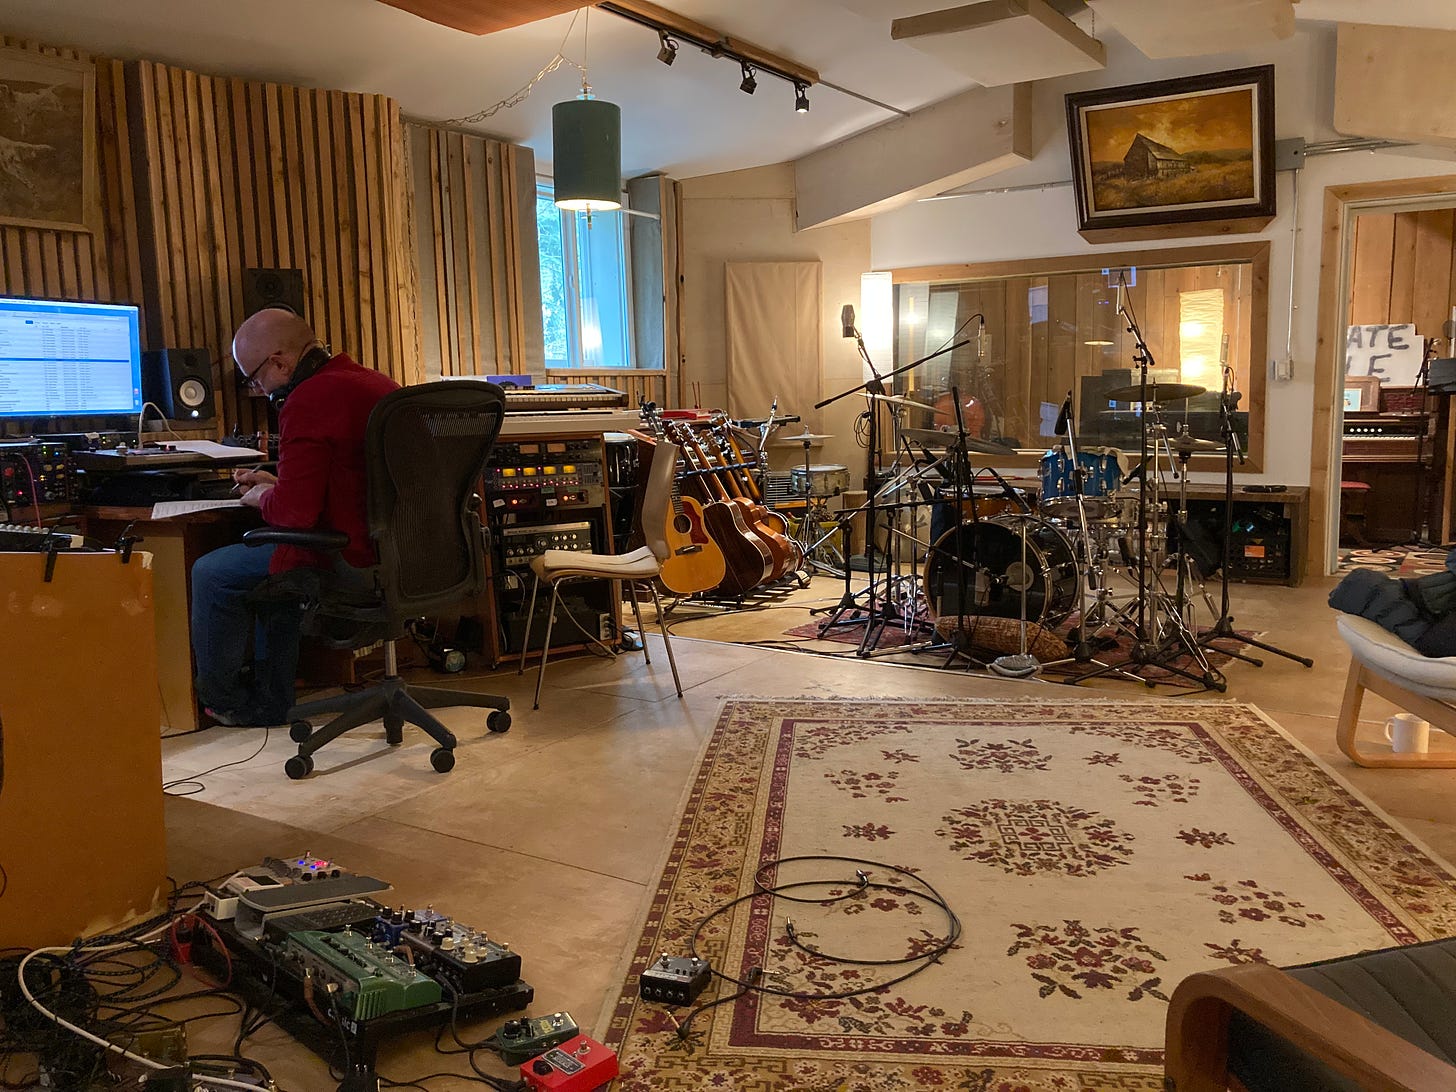 Studio Session Update: Day 1 - by Kevan Gilbert